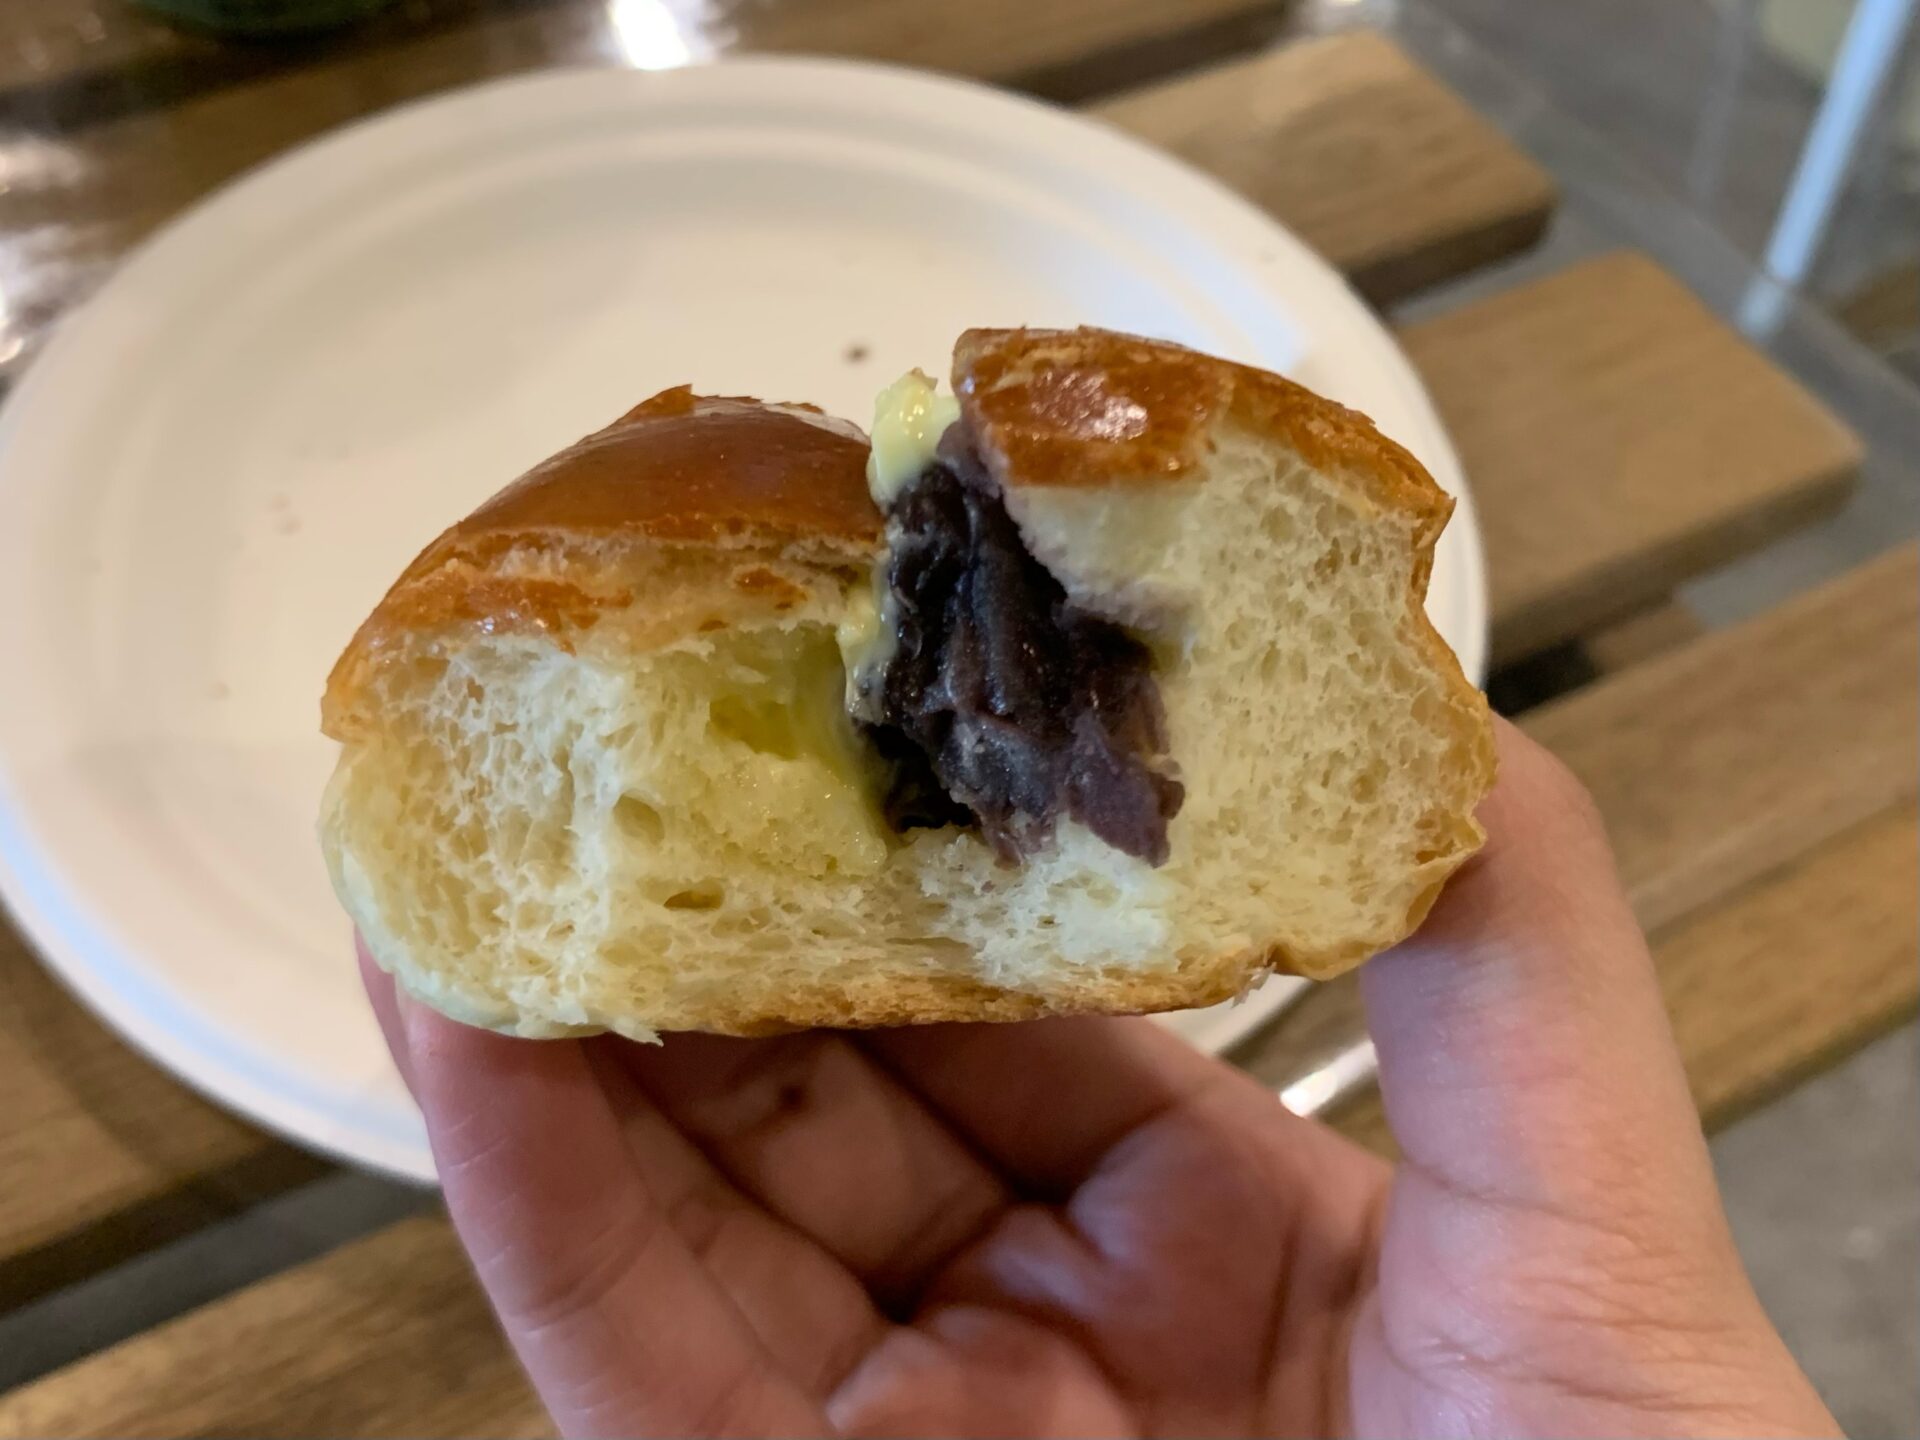 Old Hands Cafeteria - Anko butter bun cross-section